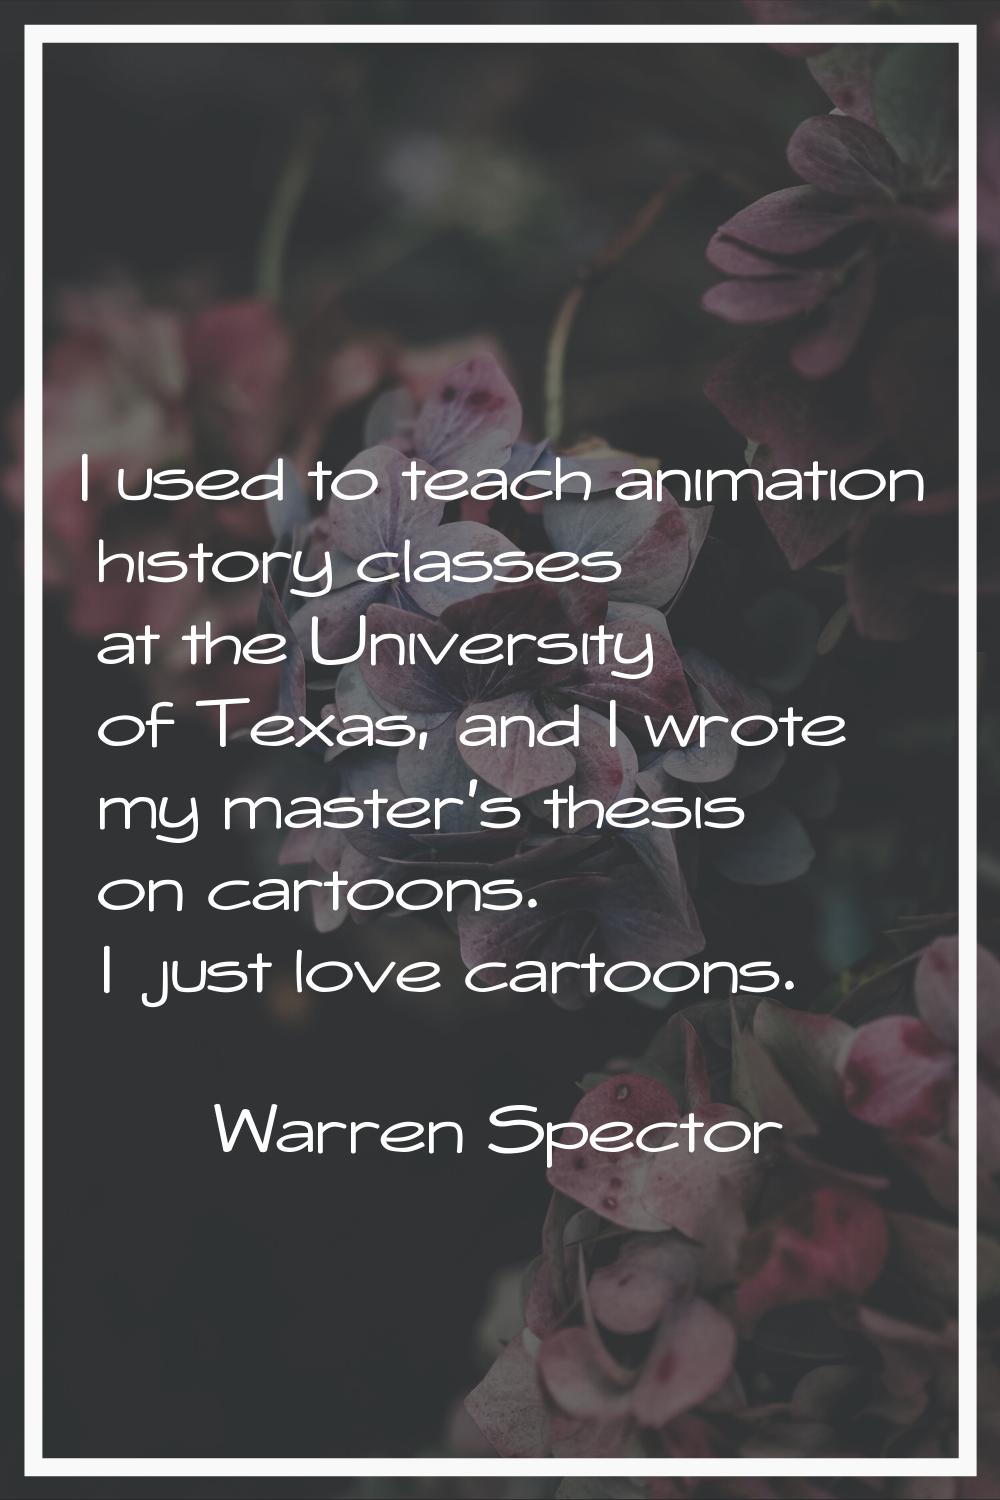 I used to teach animation history classes at the University of Texas, and I wrote my master's thesi